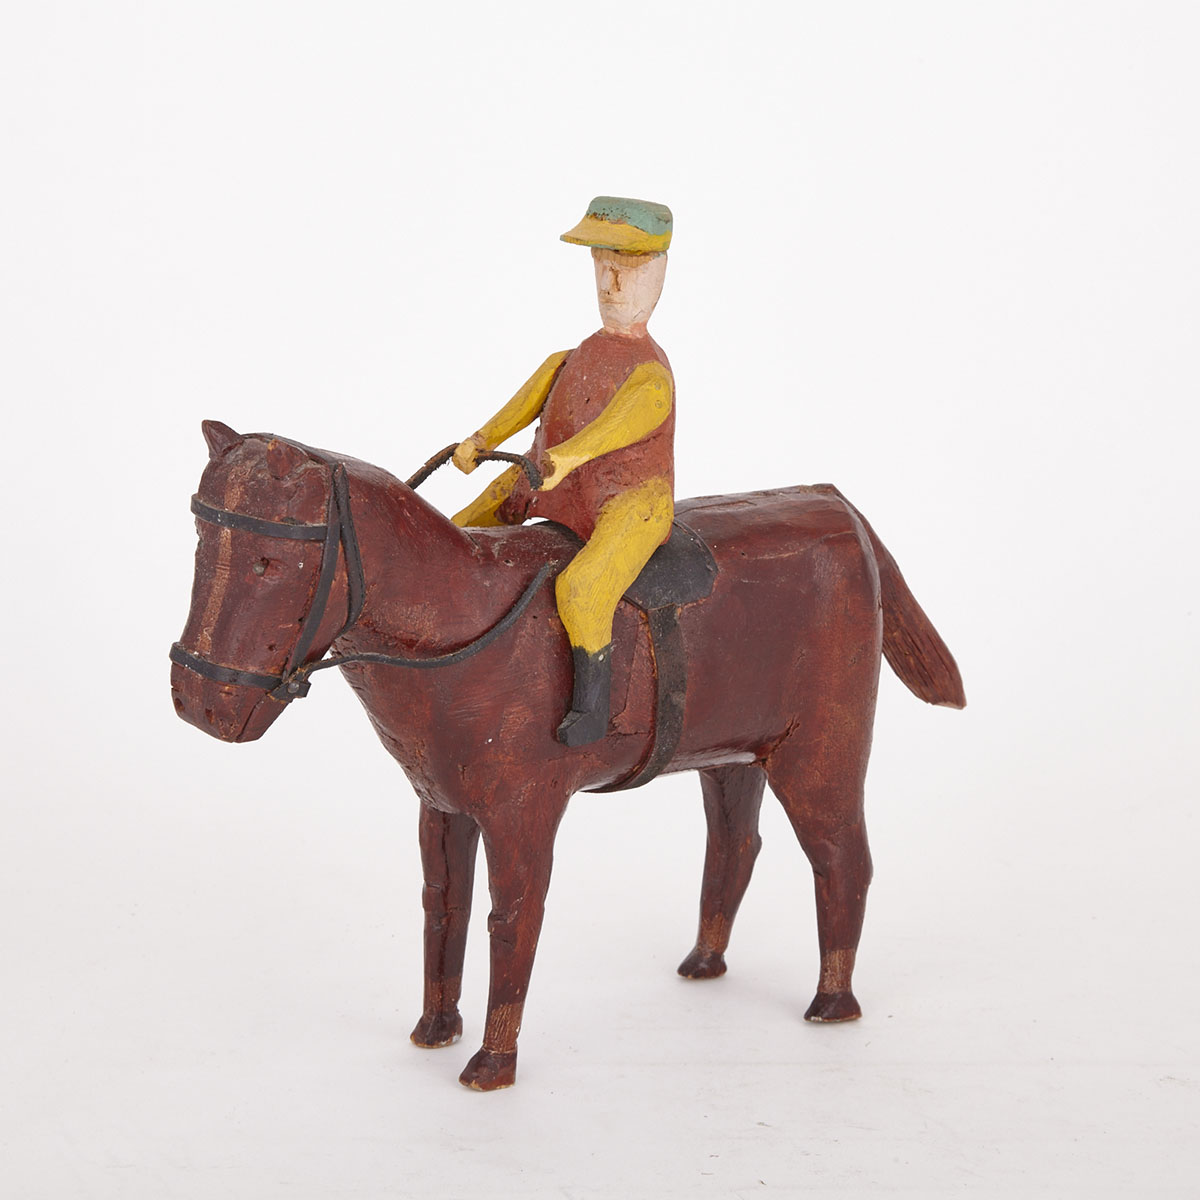 Carved and Polychromed Group of a Jockey on Horseback, mid 20th century